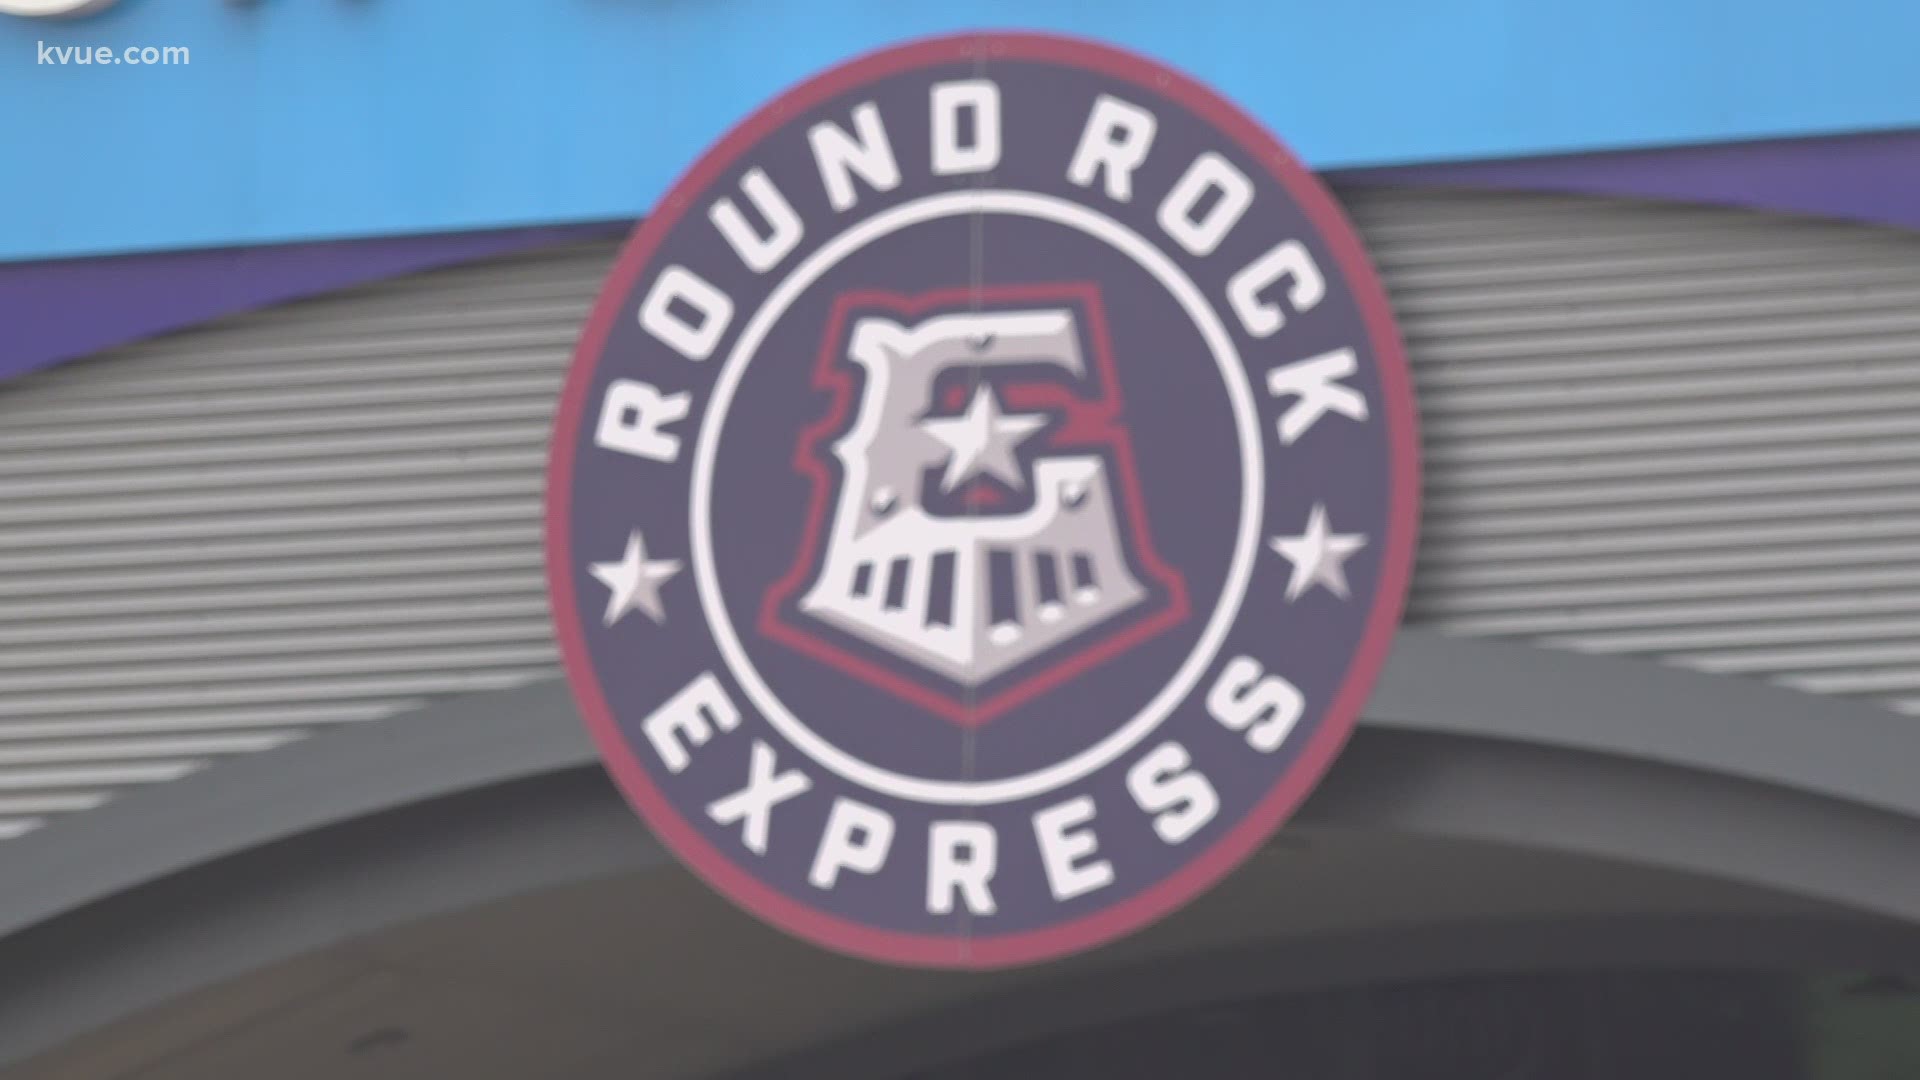 Round Rock Express welcomes new manager